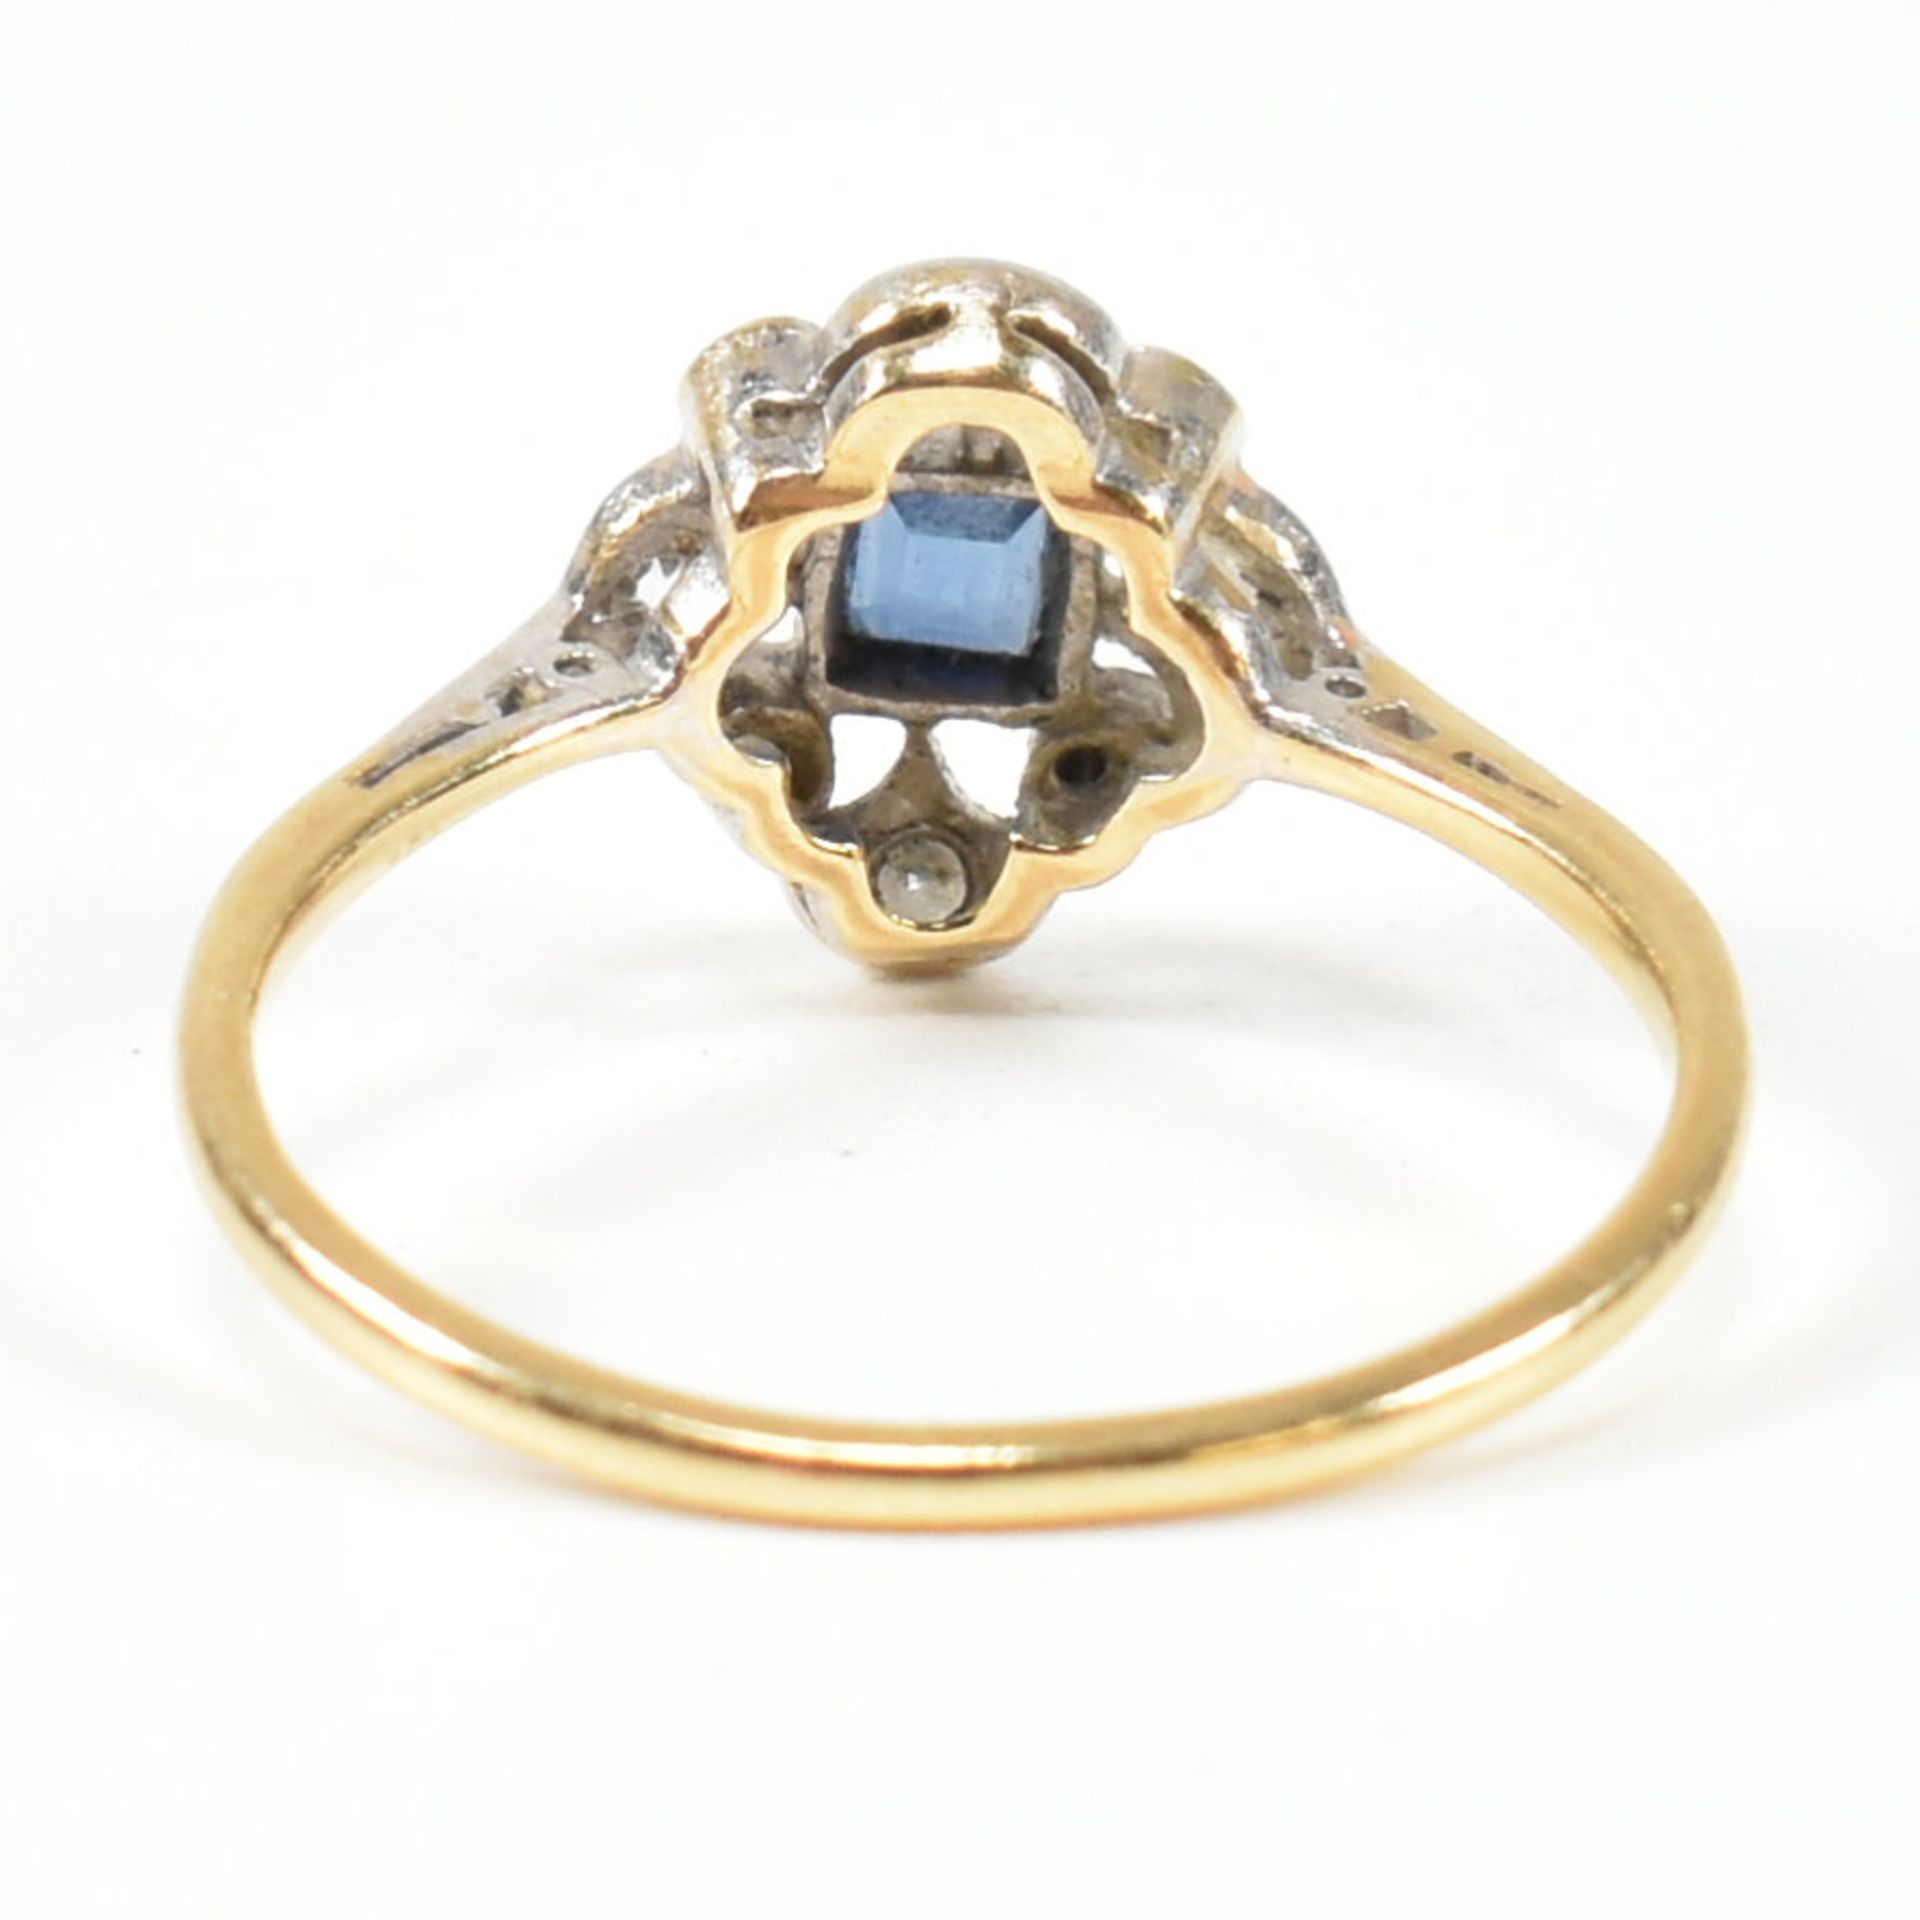 1920S 18CT GOLD SAPPHIRE & DIAMOND CLUSTER RING - Image 5 of 8